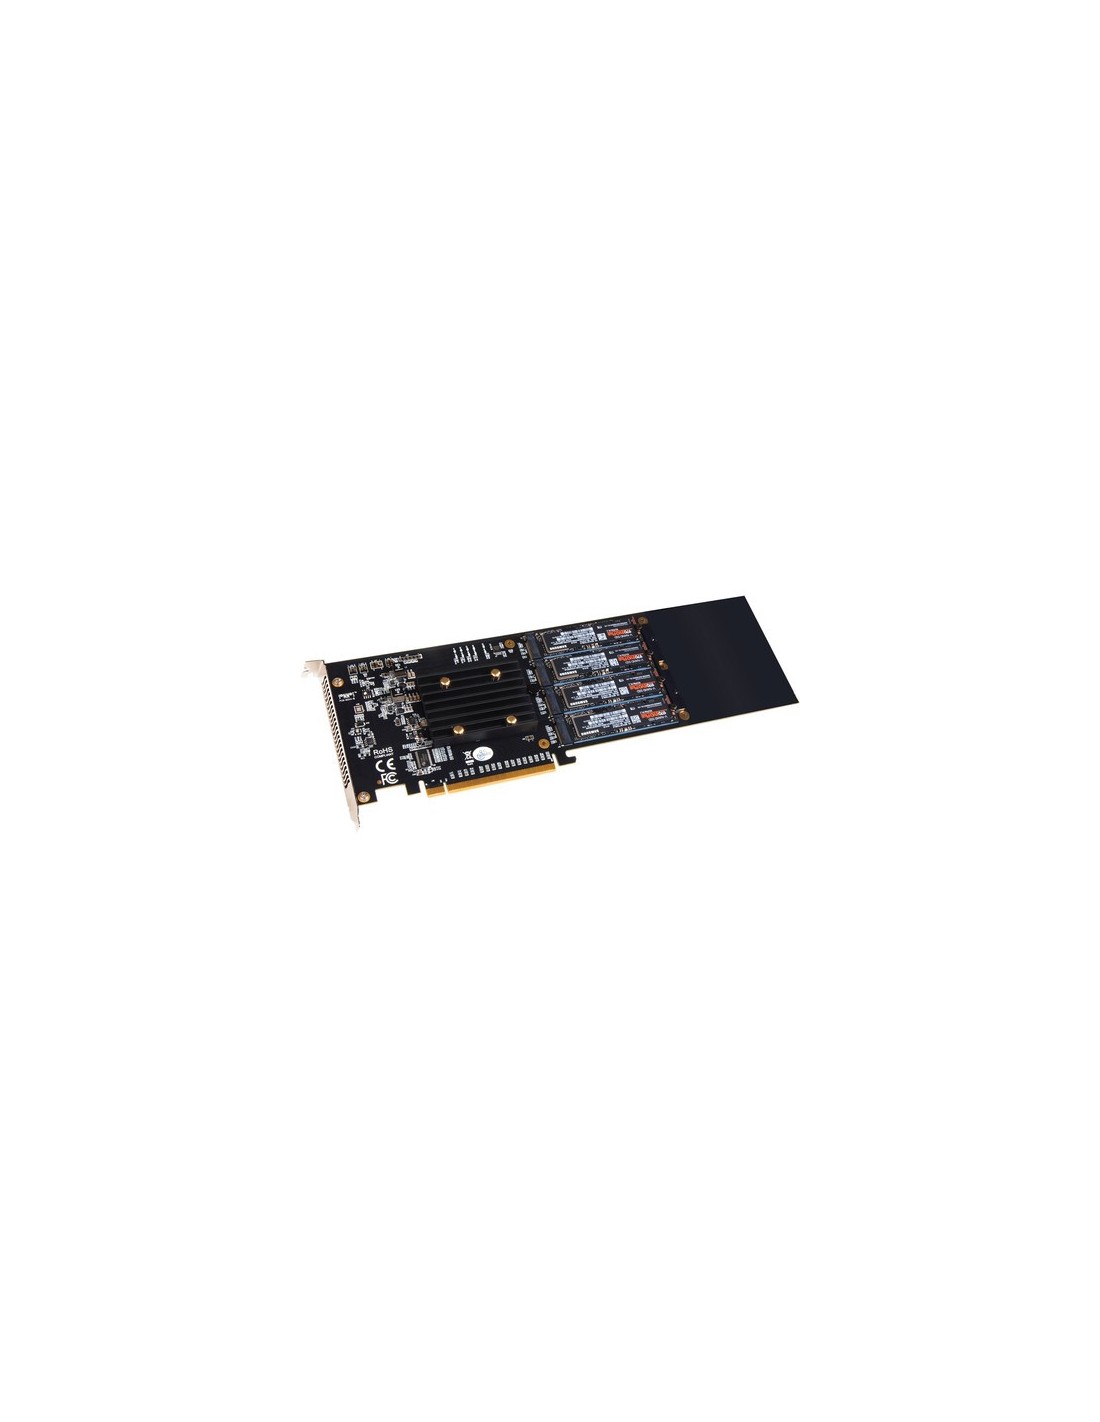 Sonnet Fusion SSD M.2 4x4 PCIe Card [Silent] - SSD Not Included *